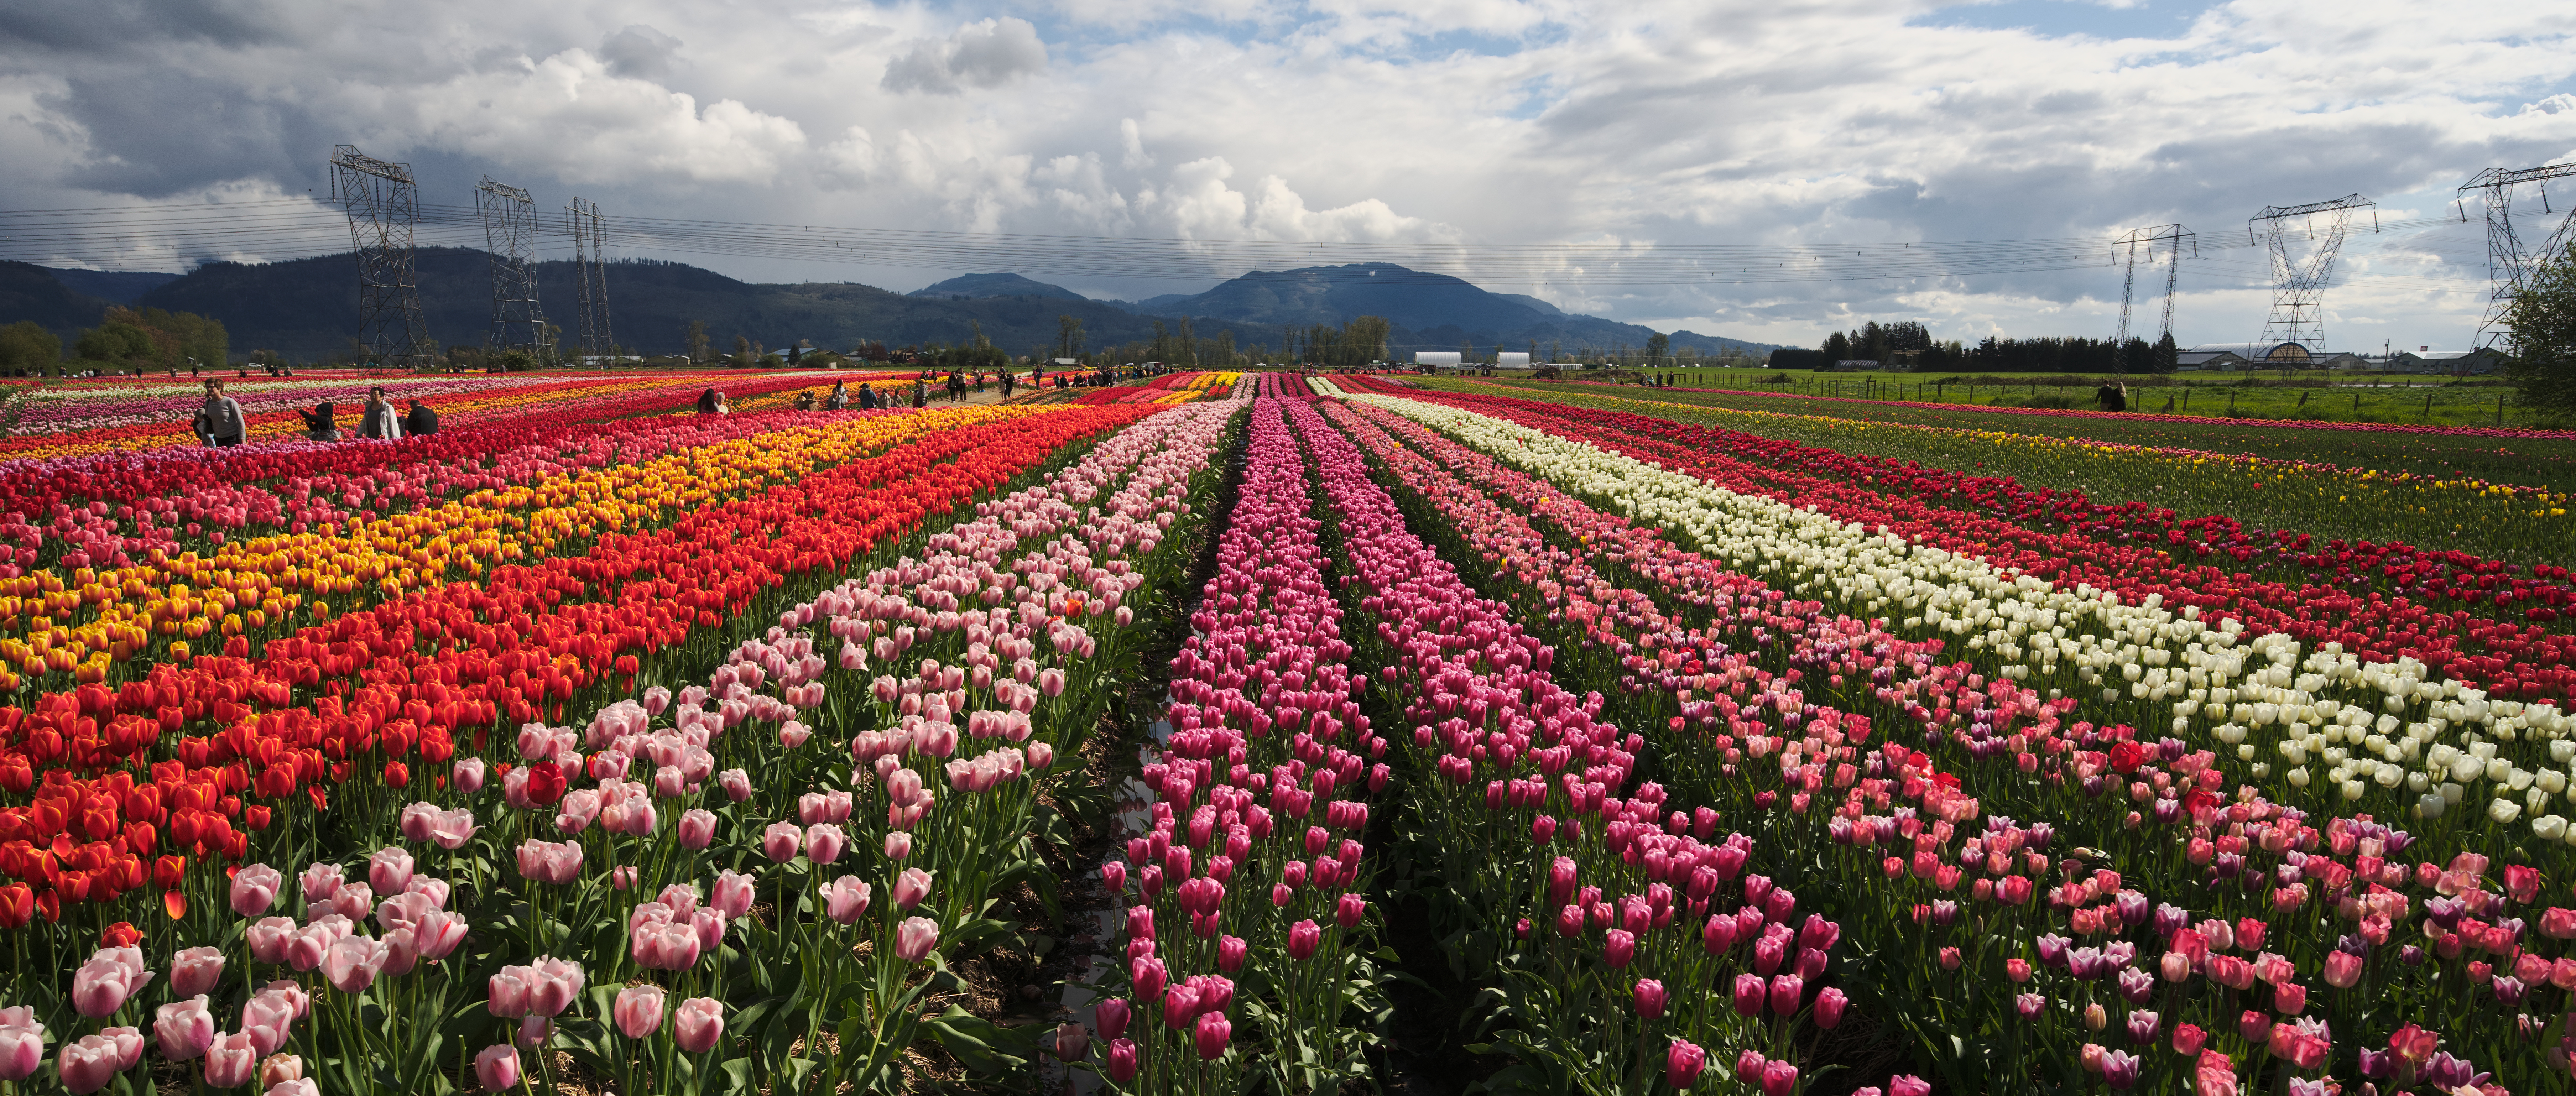 Tulips in Amsterdam: Worth the Visit? - PlacePass Blog